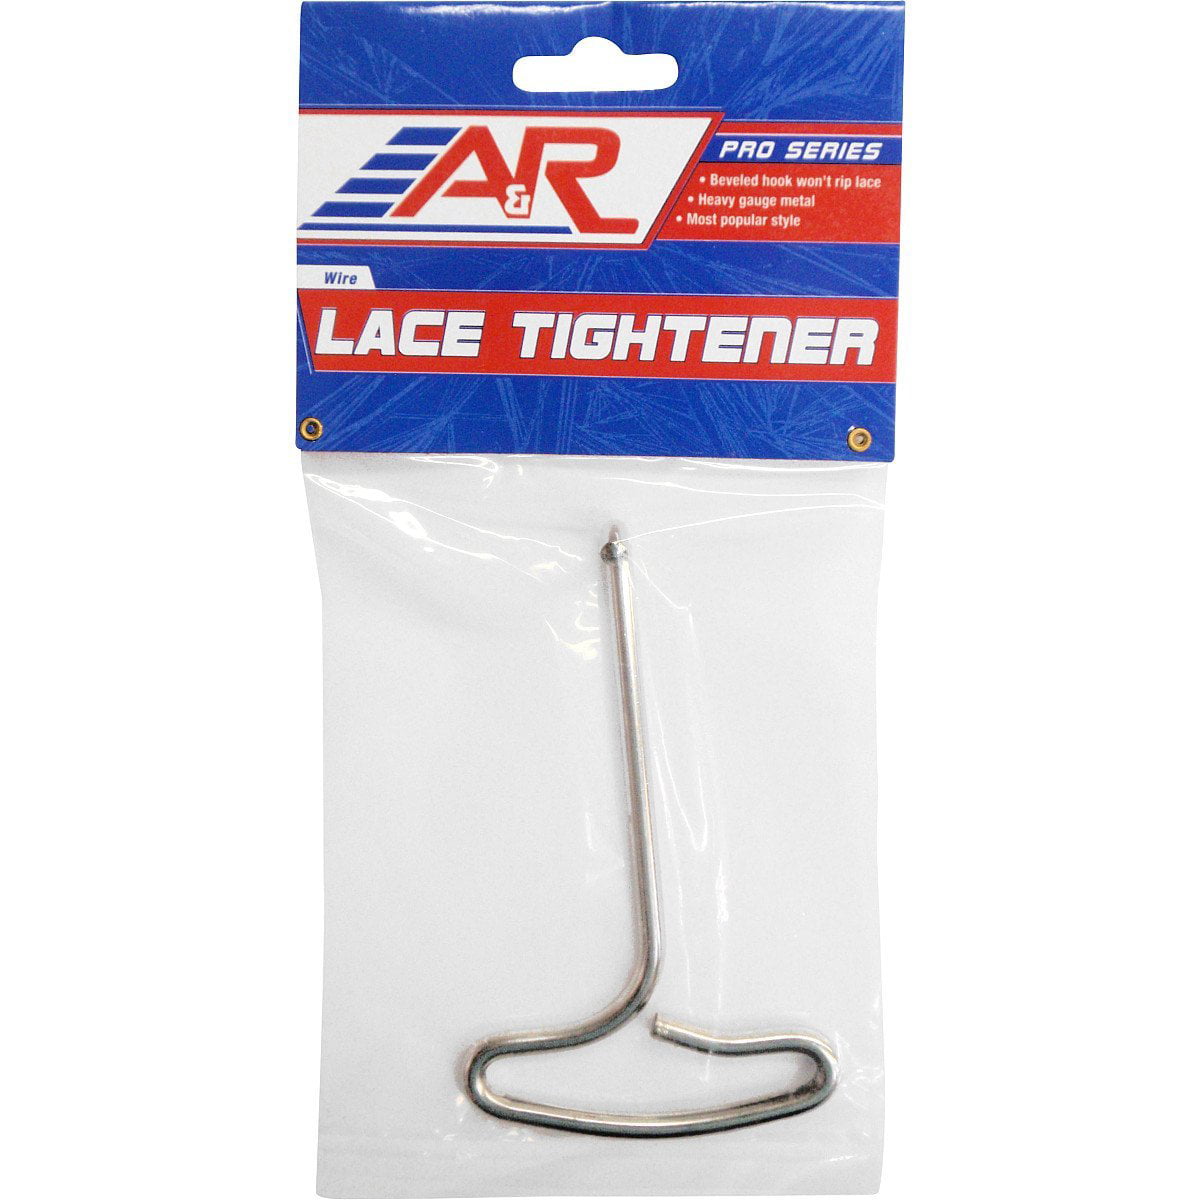 A/&R Sports Folding Lace Tightener